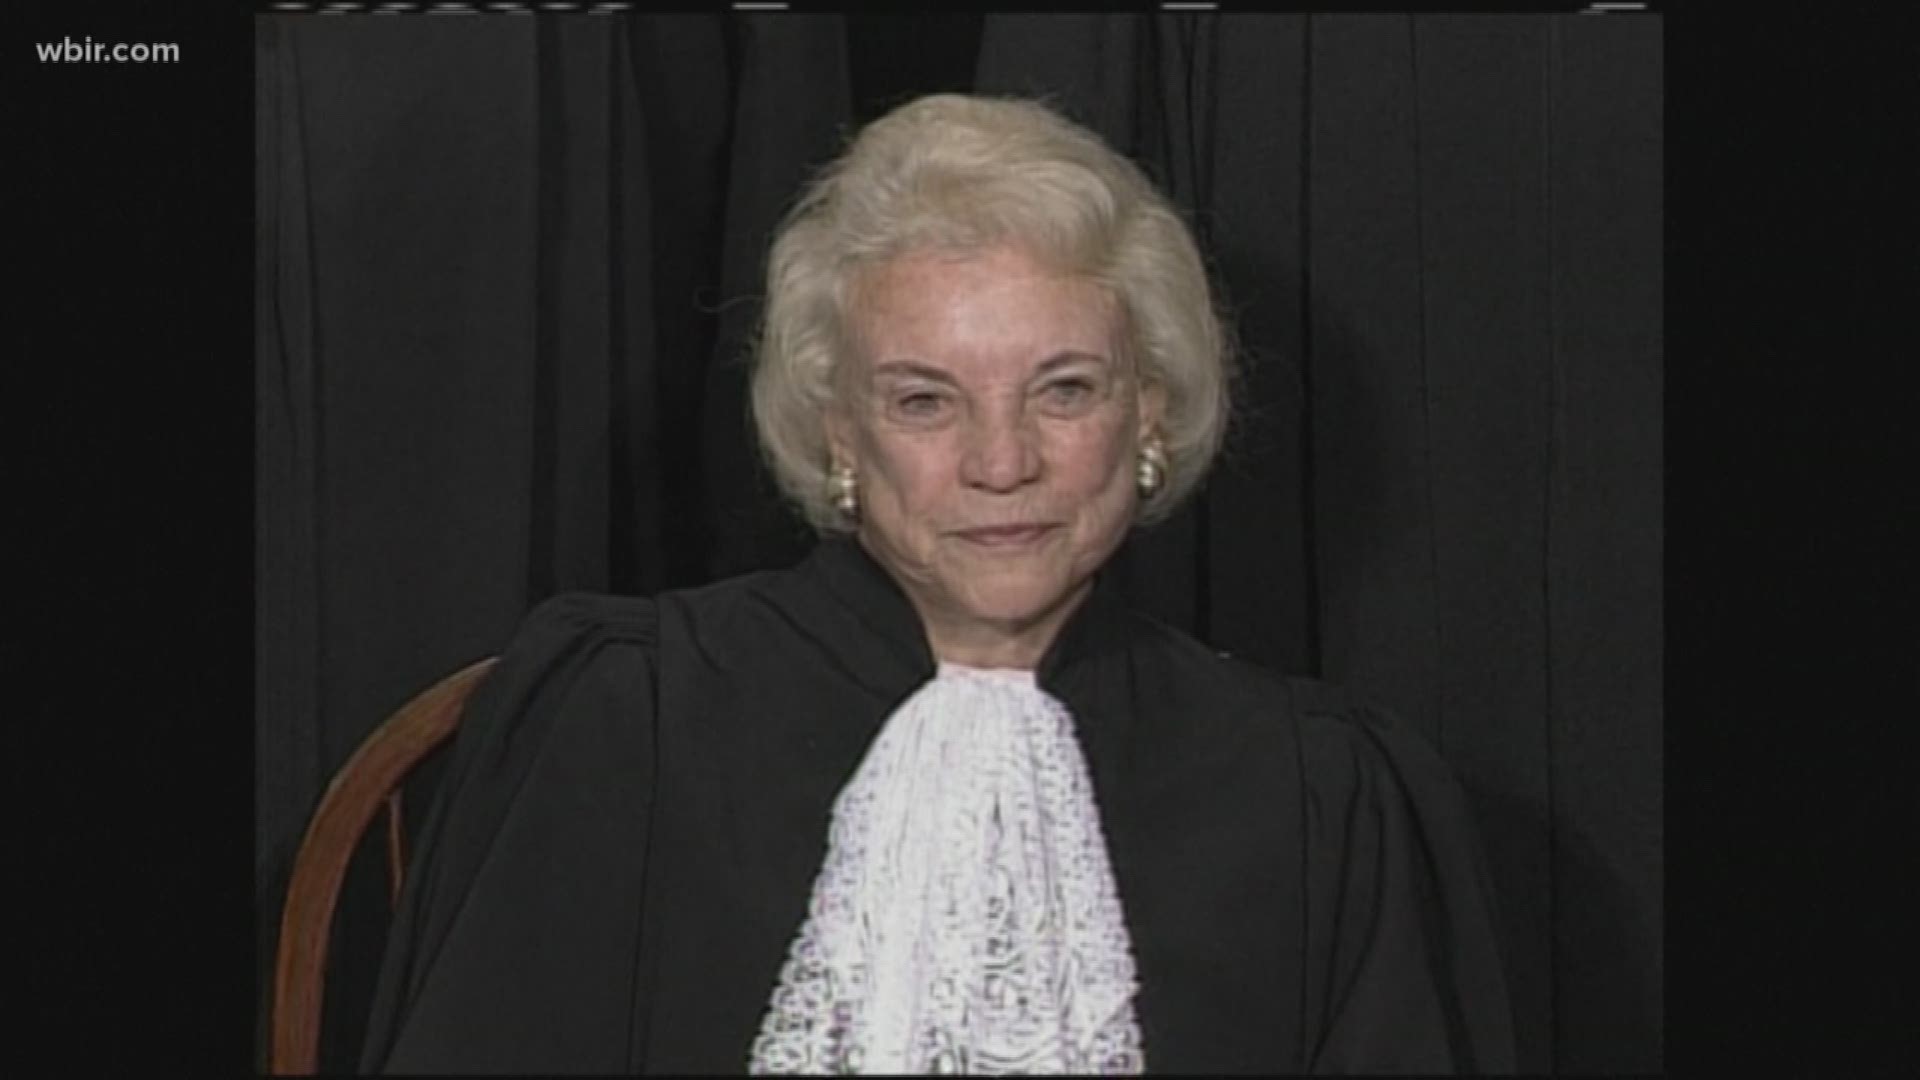 Former Supreme Court Justice Sandra Day O'Connor announced she is in the early stages of what is likely Alzheimer's disease. She joins millions of other people and families dealing with this terrible disease. Kay Watson with Alzheimer's Tennessee talks ab